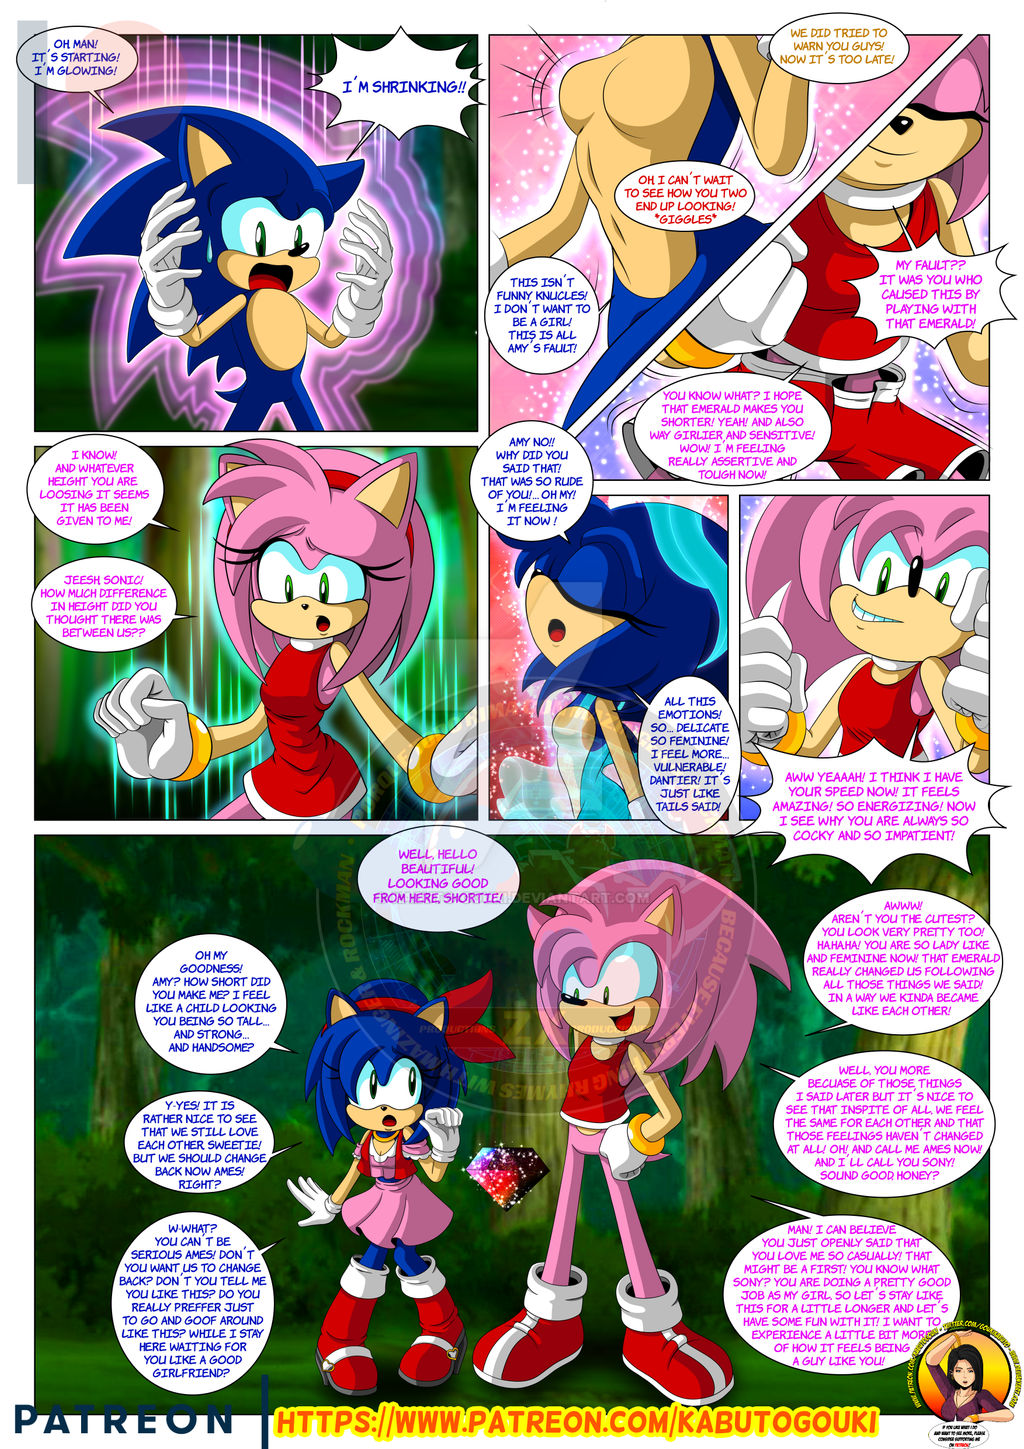 Sonic Chaos on the Genesis by Jacob-turbo on DeviantArt